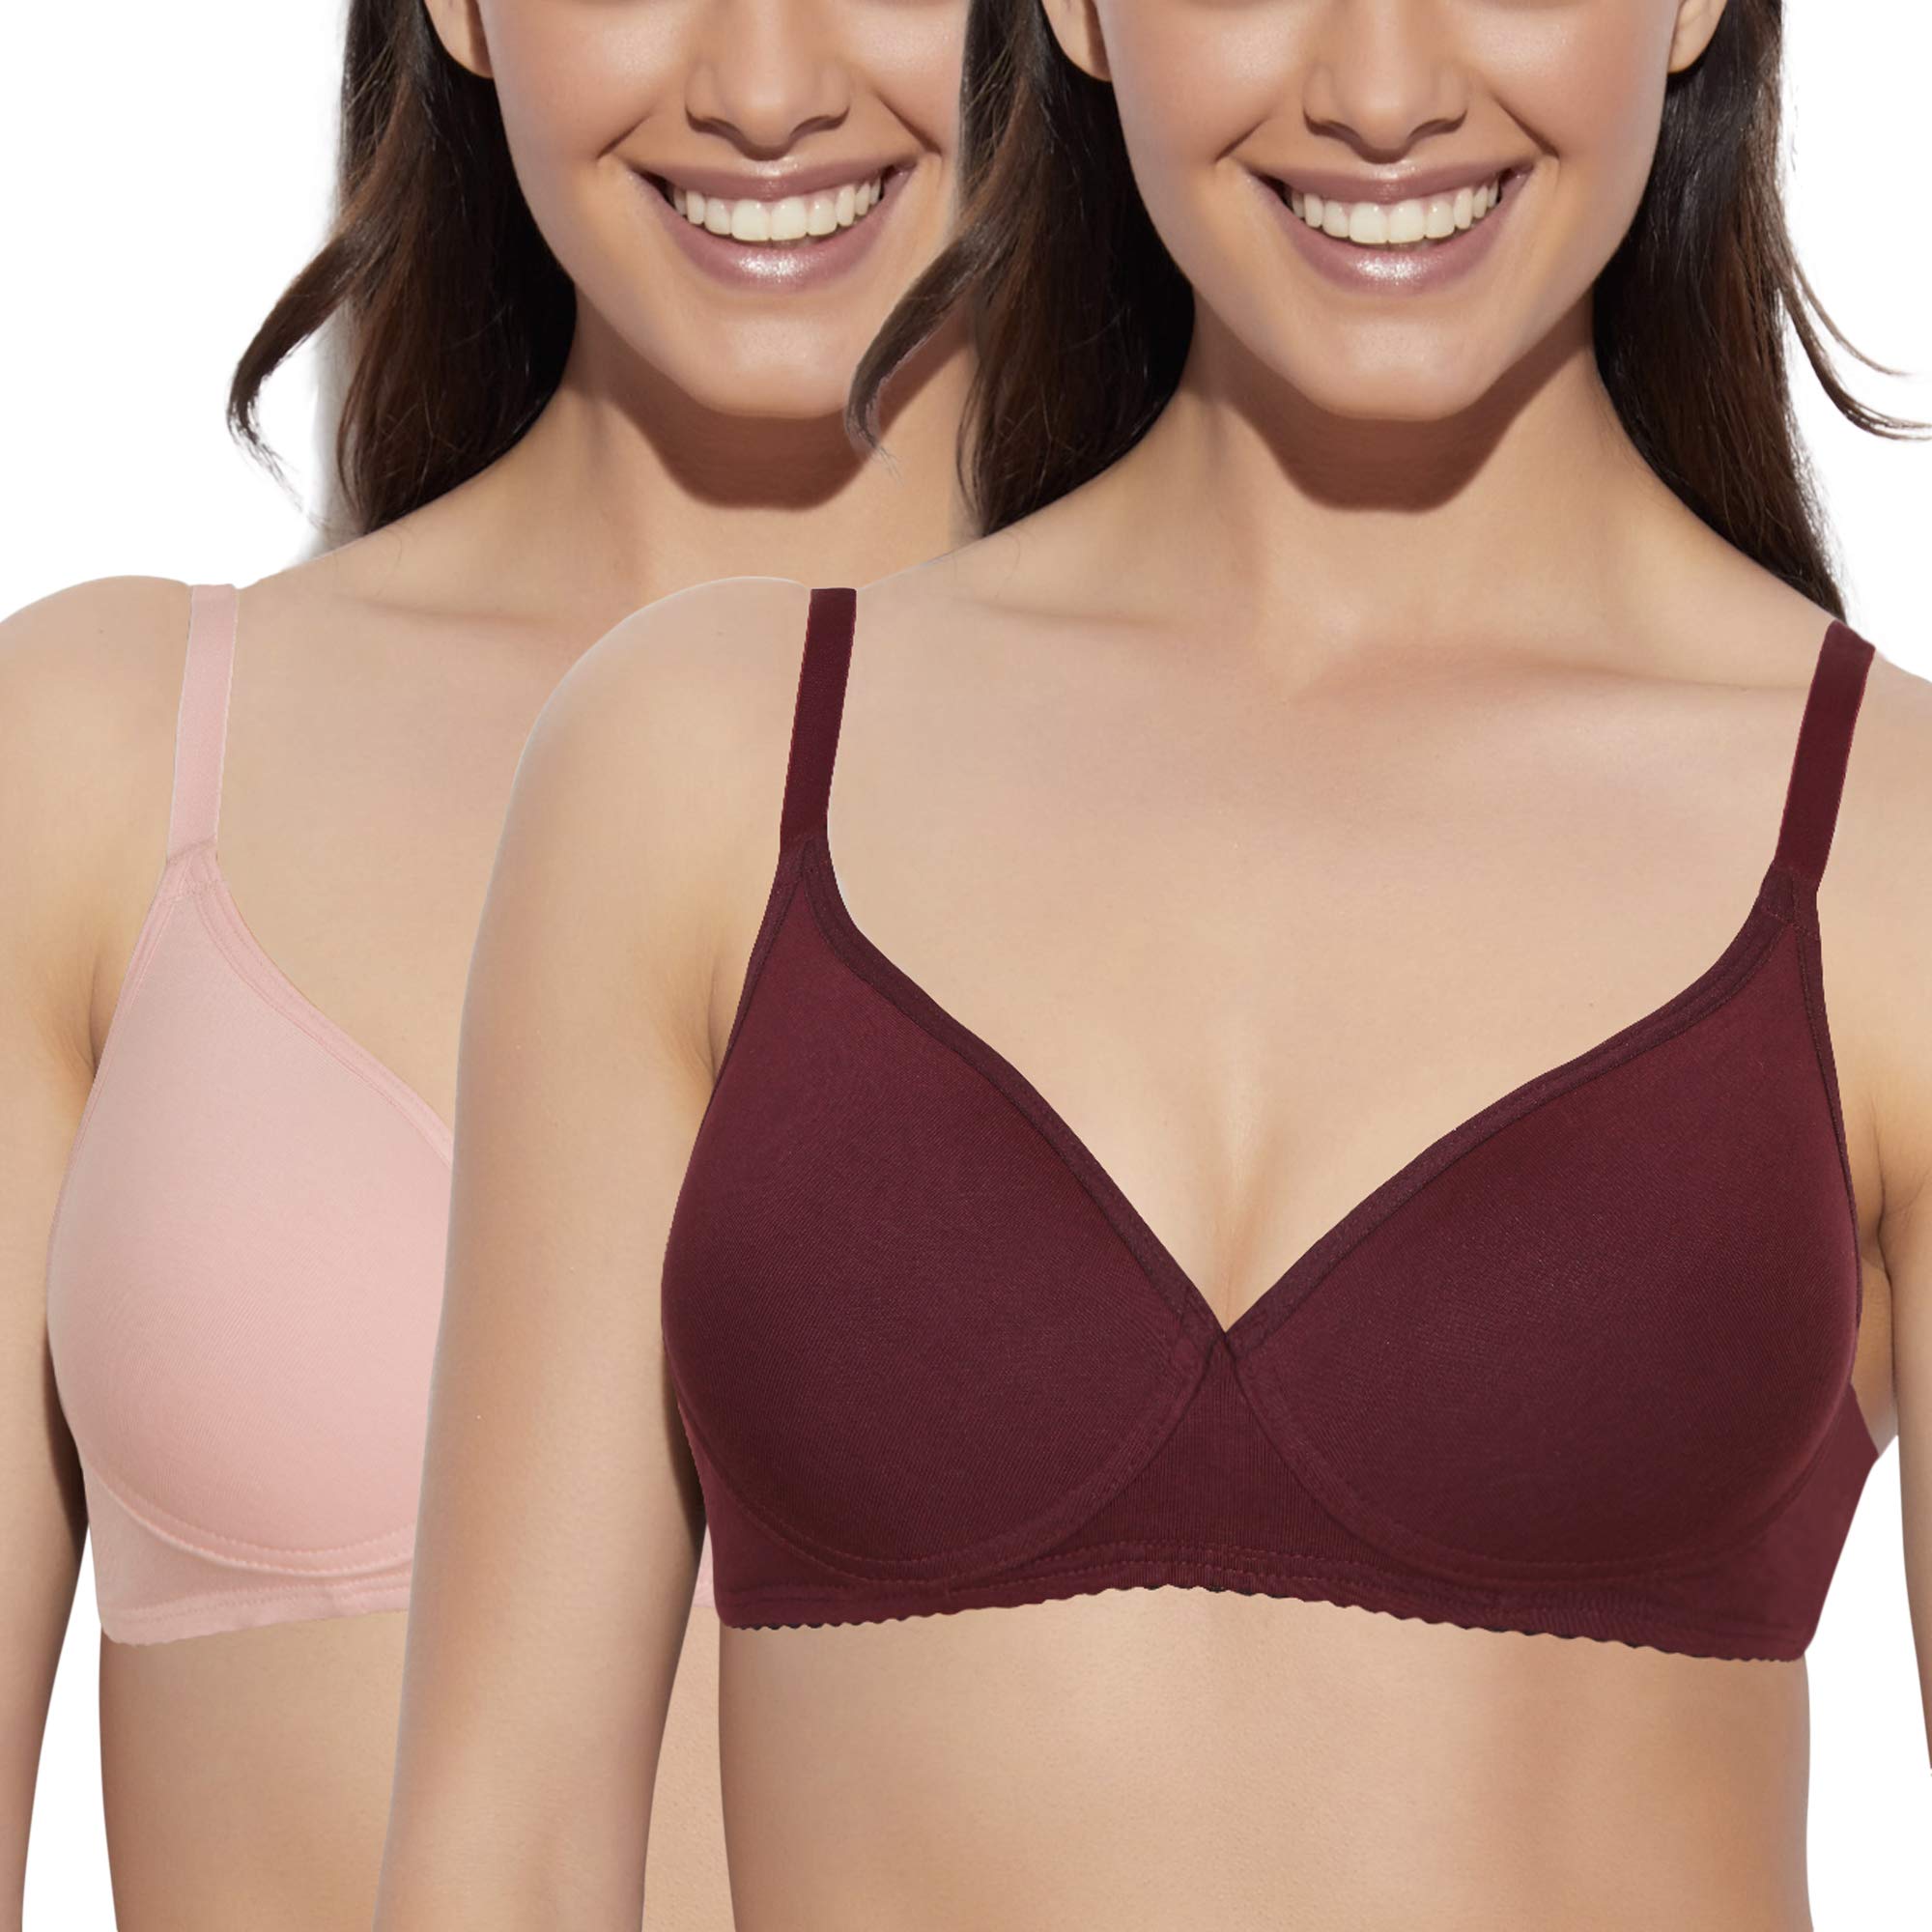 Enamor A039 Everyday stretchable cotton T-shirt Bra for women - Padded,  non-wired & medium coverage